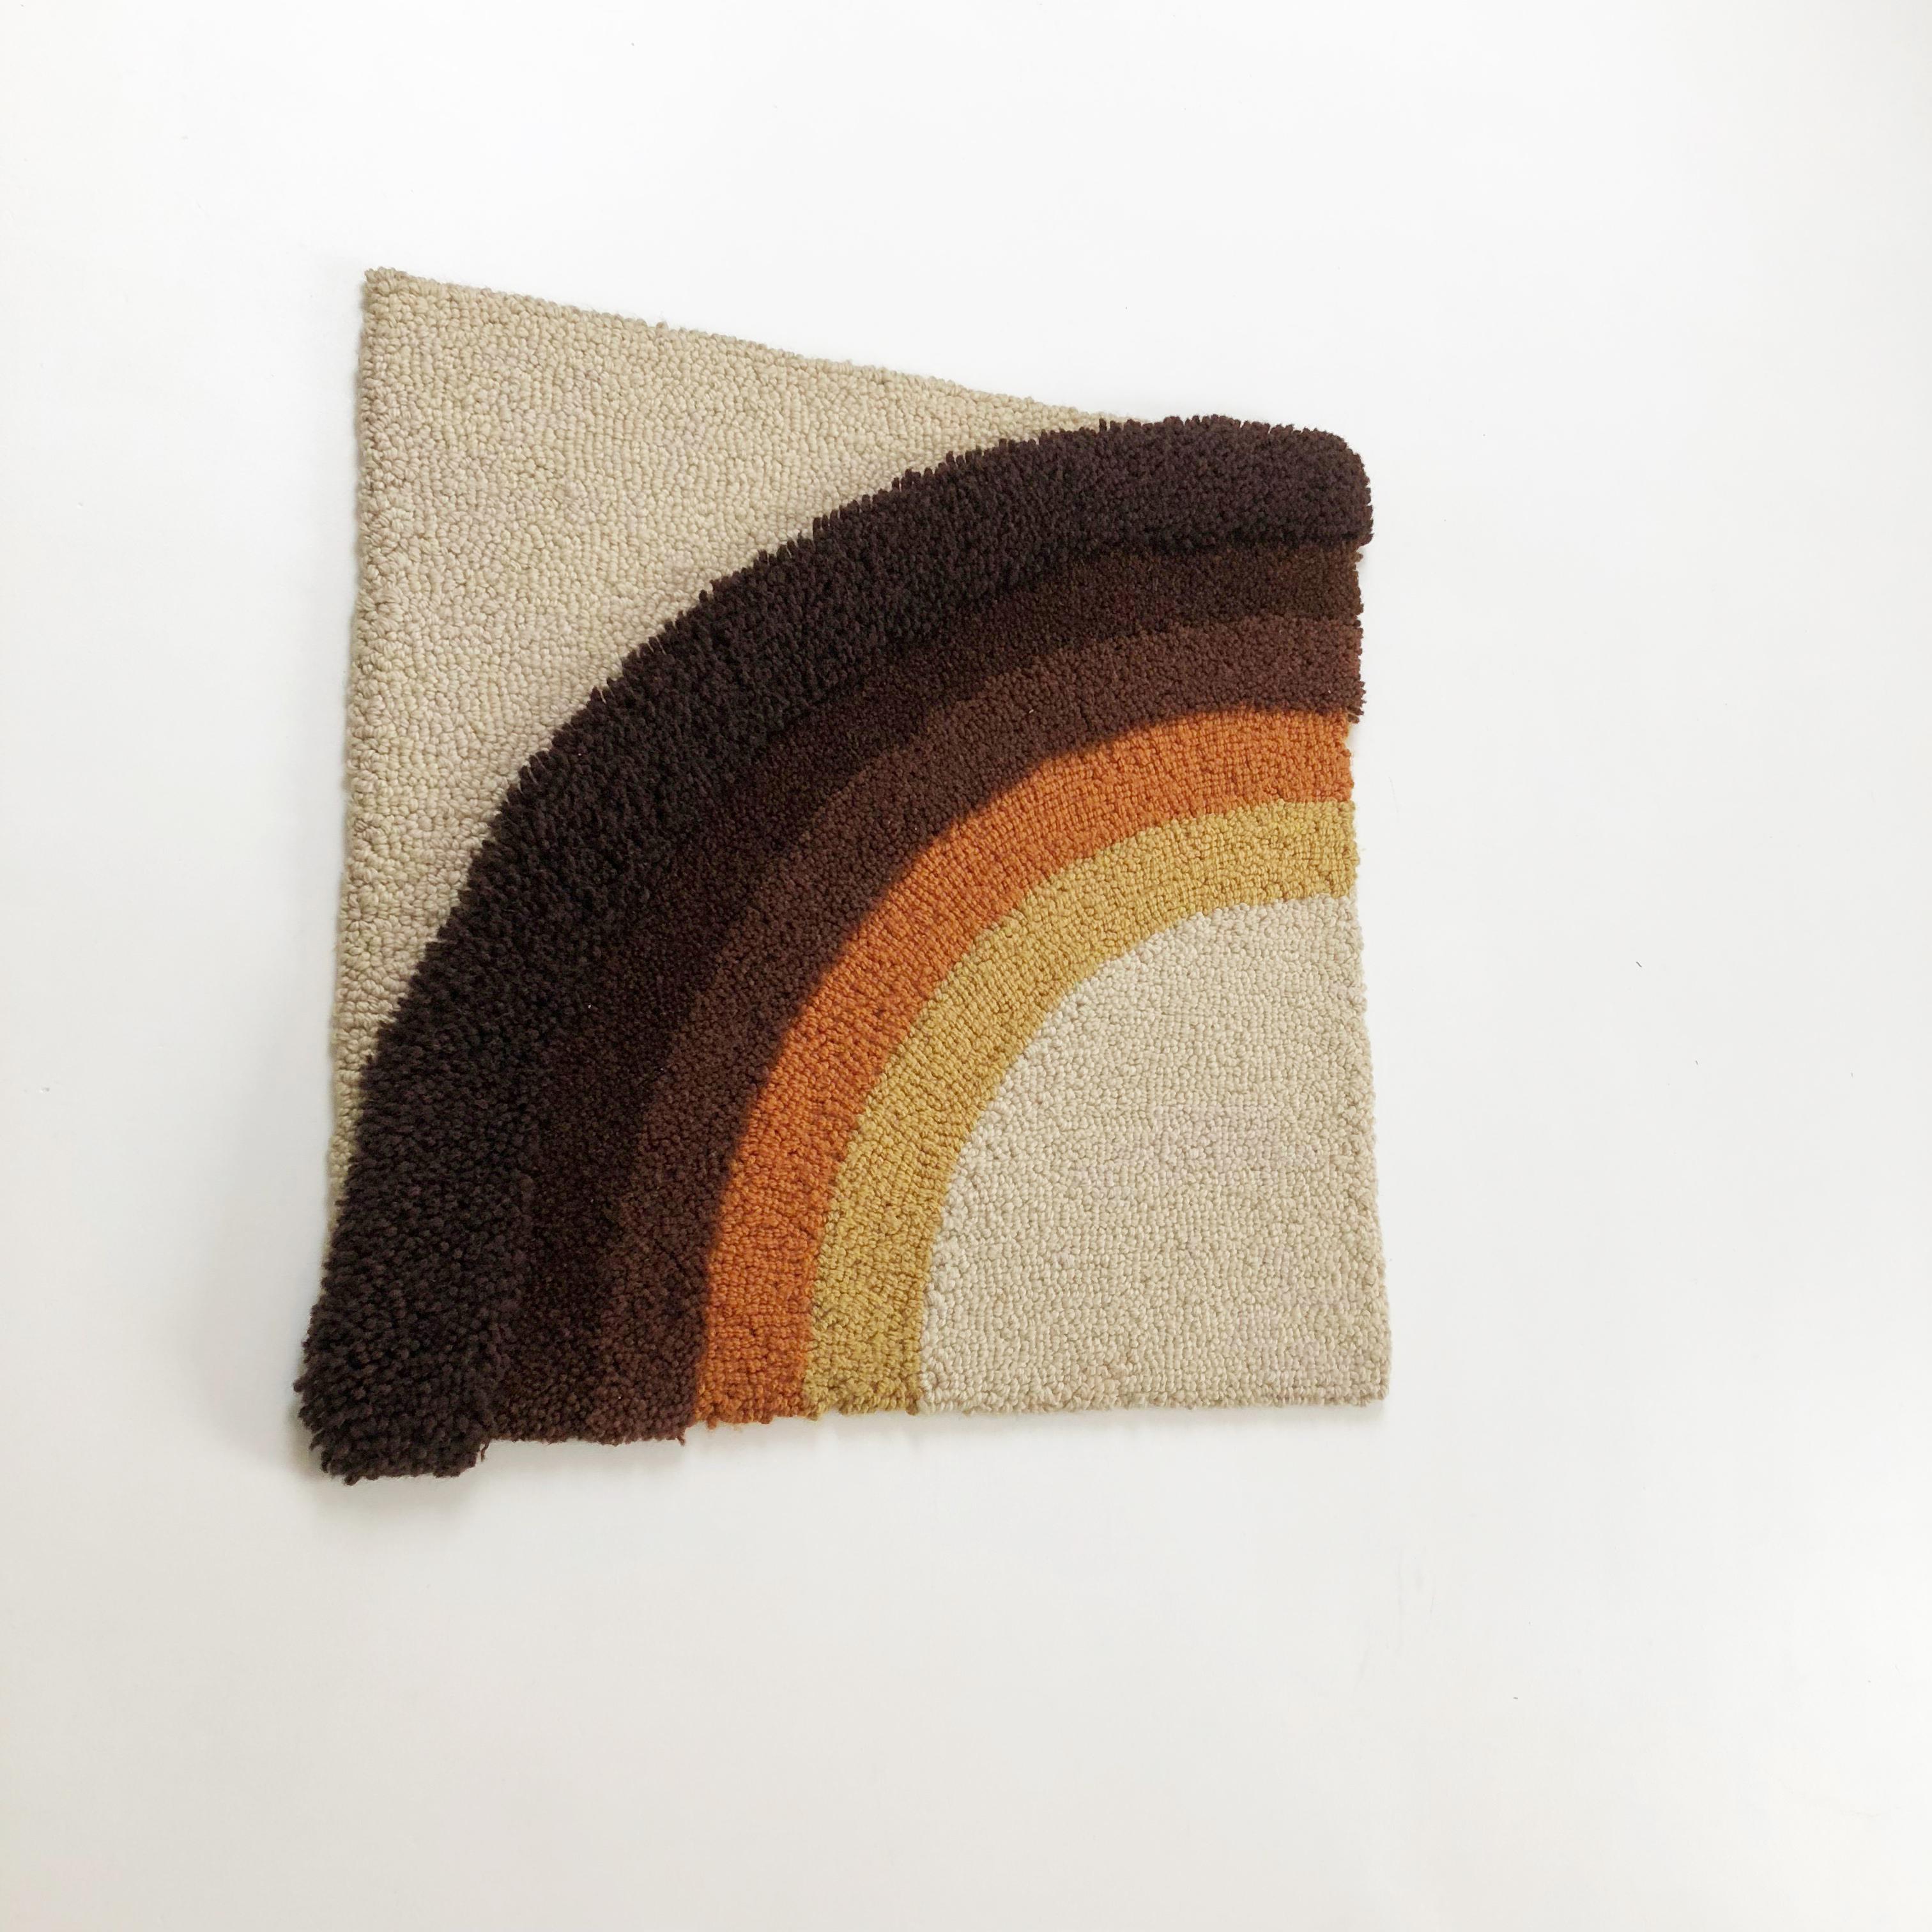 Article:

Wall hanging element


Decade:

1970s


Origin:

Germany


Design:

Ewald Kröner attrib.


This rug is a great example of 1970s pop art interior. Made in high quality handmade macrame weaving technique in Germany in the